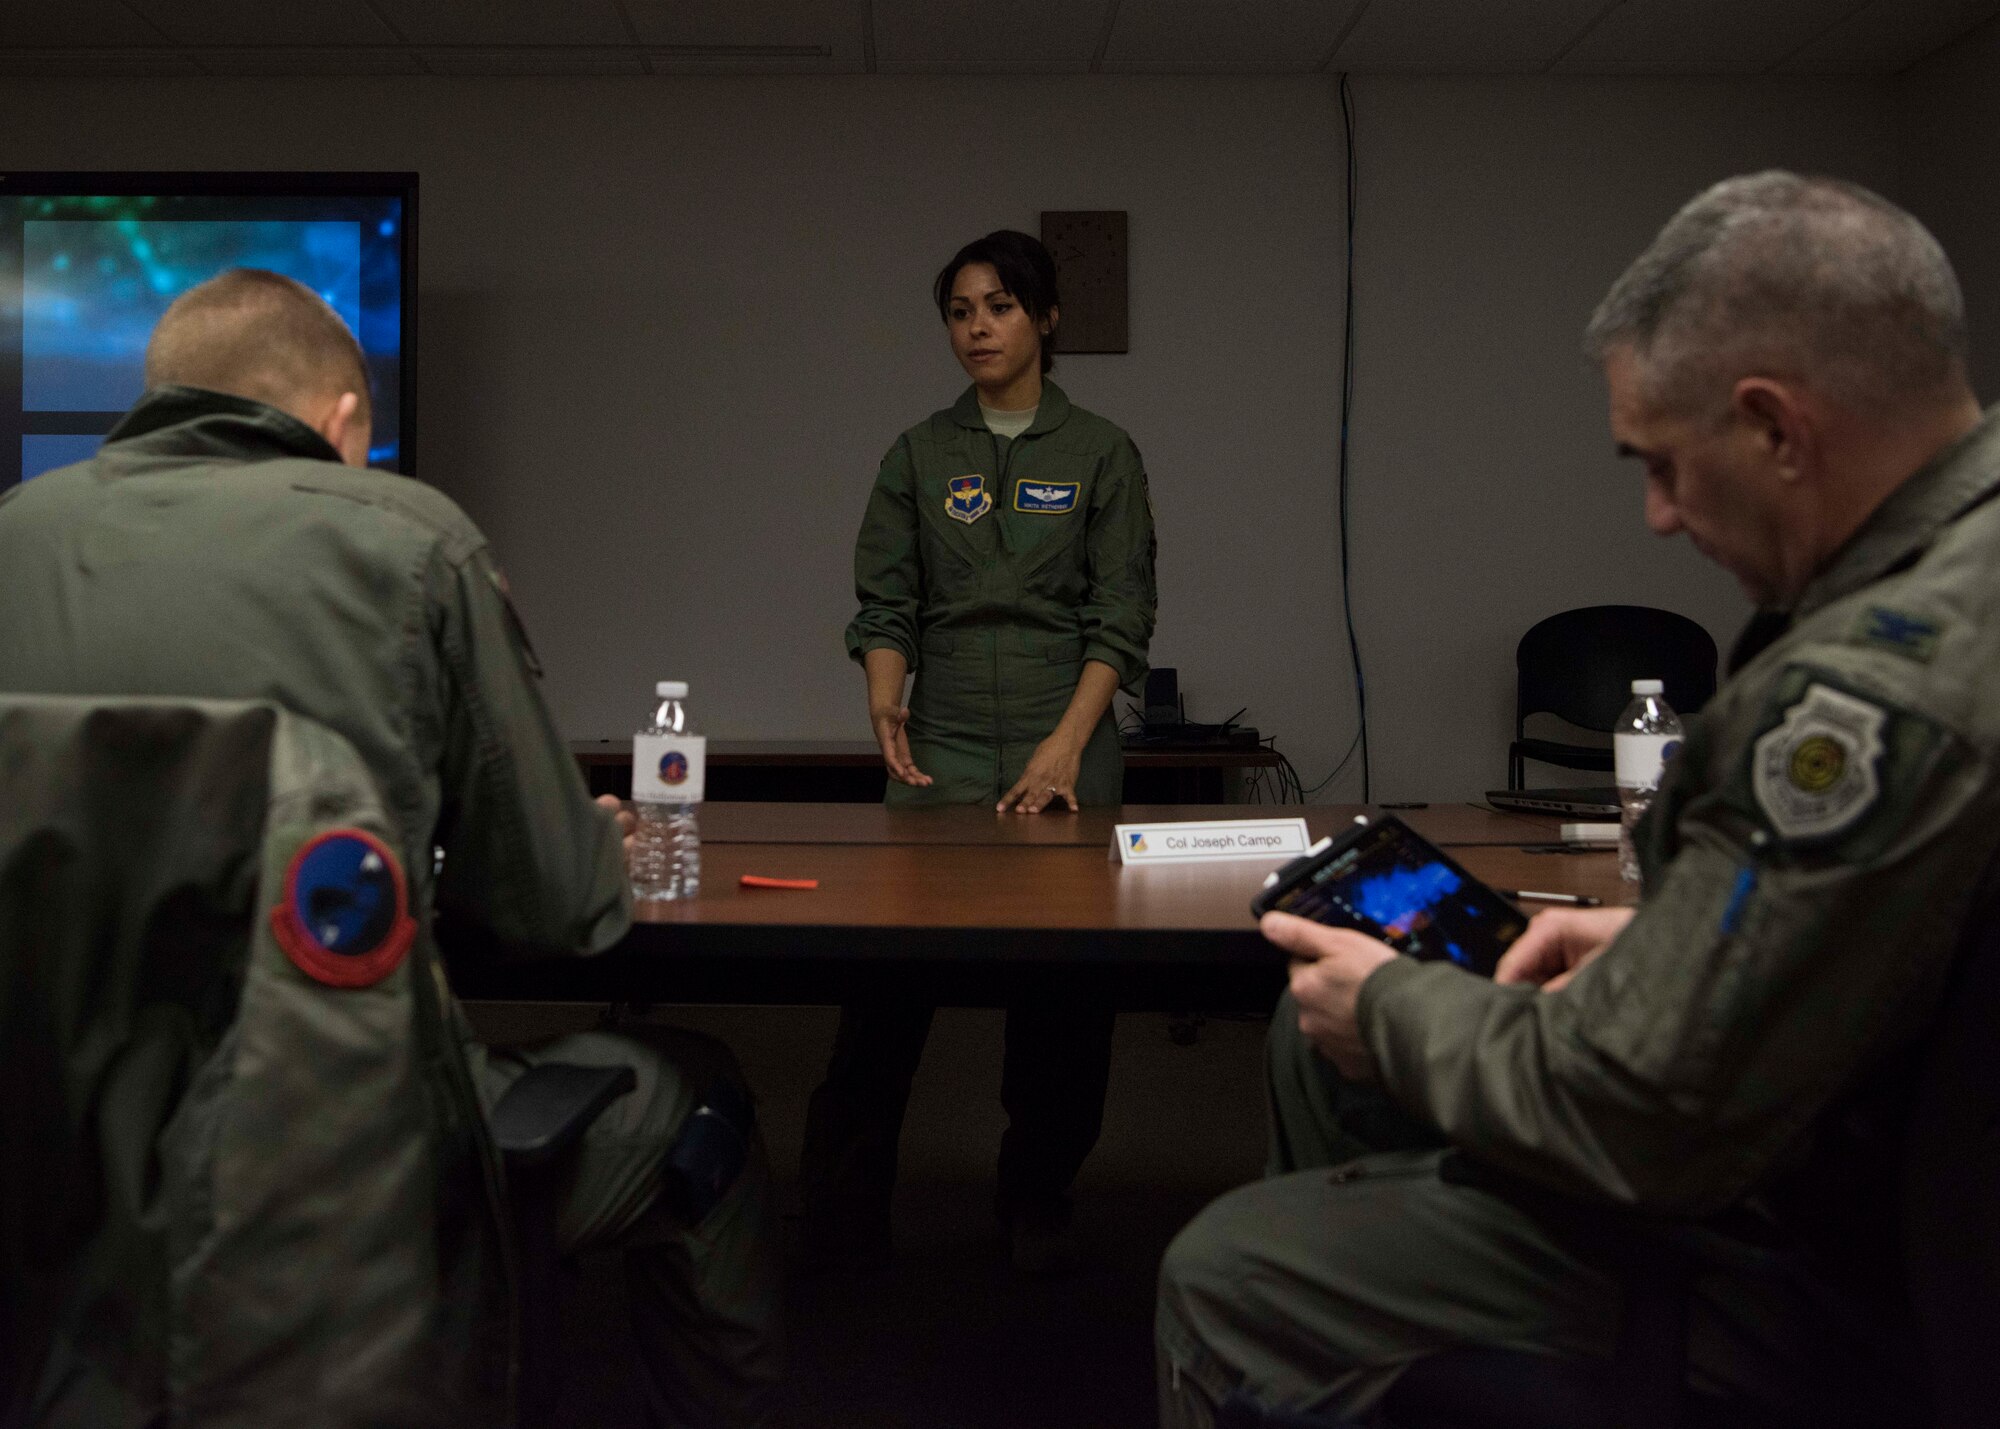 Maj. Nikita Wetherbee, 16th Training Squadron chief of training, briefs Brig. Gen. James Cluff, Remotely Piloted Aircraft, Big Wing Intelligence, Surveillance and Reconnaissance director and Col. Joseph Campo, 49th Wing commander, about the MQ-9 Formal Training Unit Innovation project, Feb. 8, 2019, on Holloman Air Force Base, N.M. The 16th TRS is conducting the experiment with the goal of modernizing their training platforms. (U.S. Air Force photo by Staff Sgt. BreeAnn Sachs)